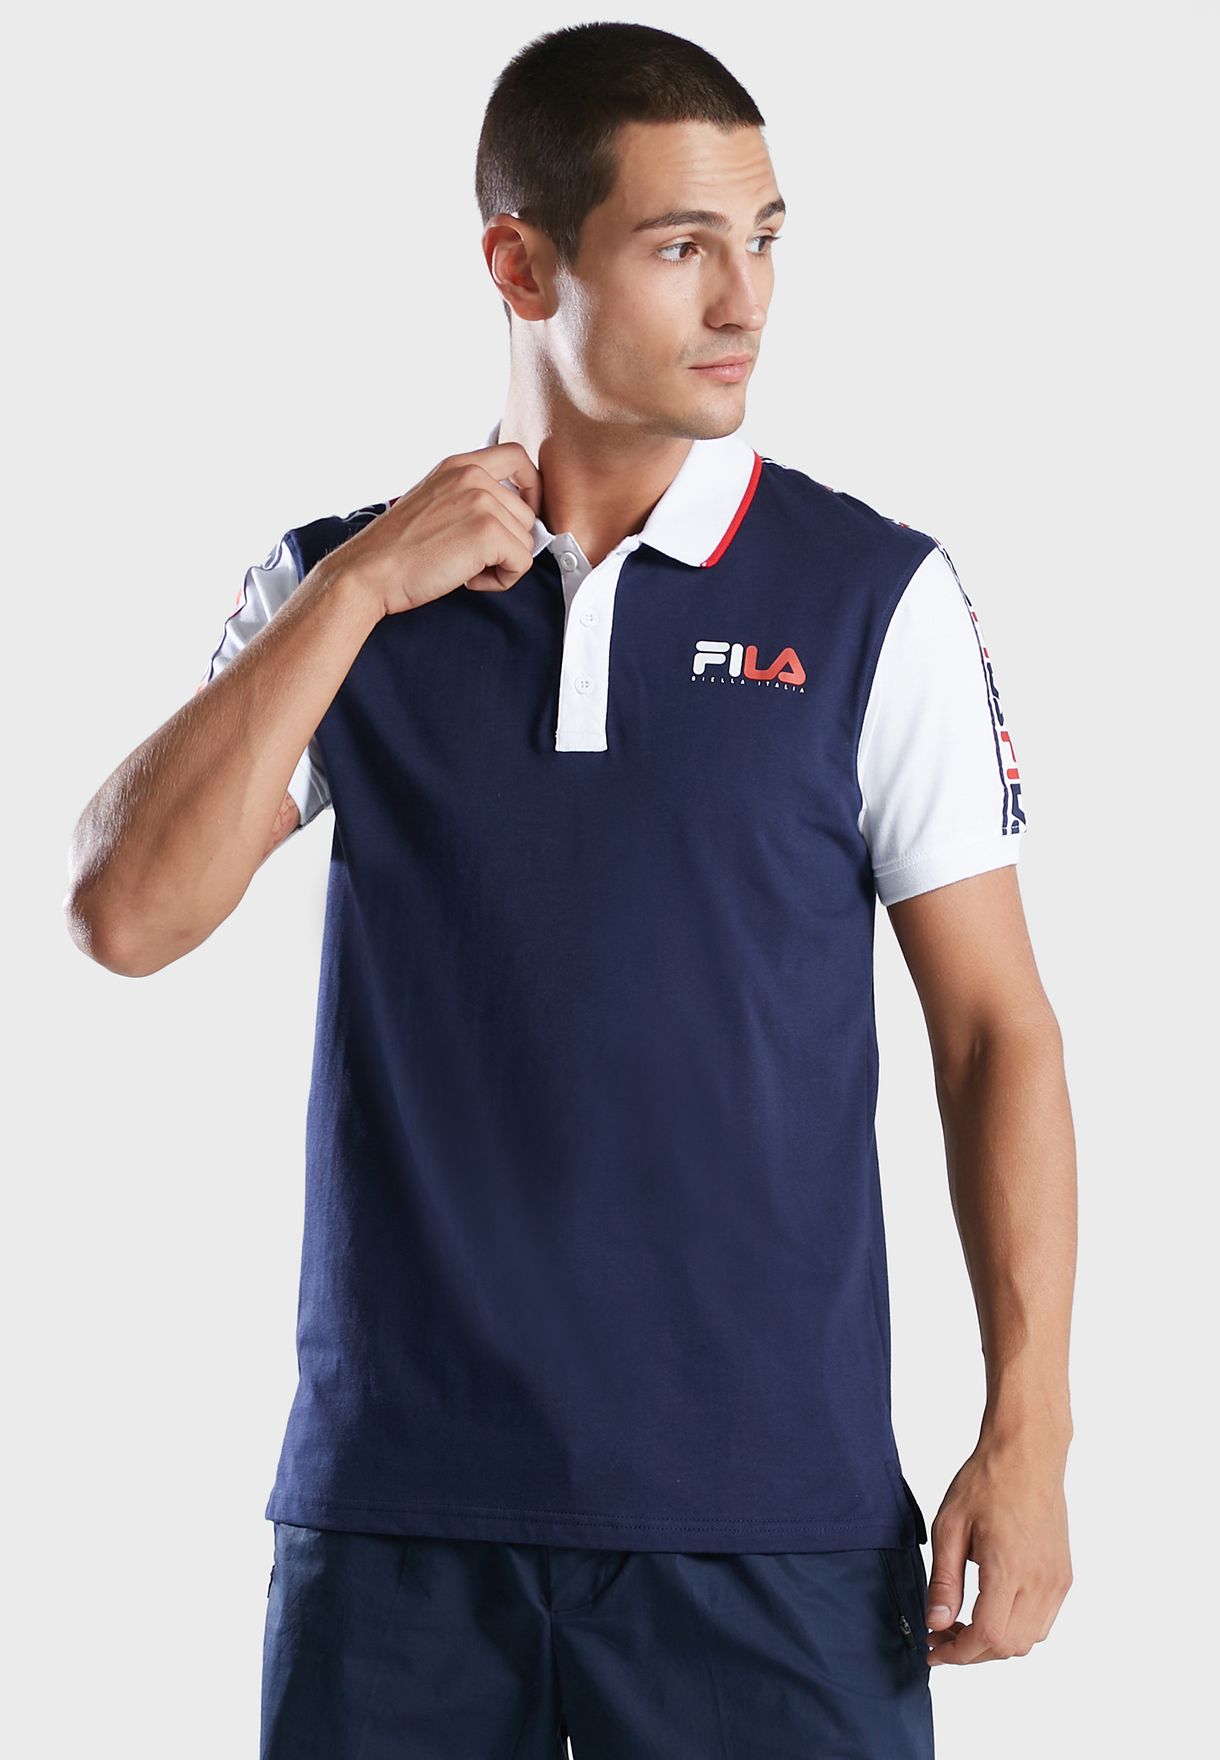 Taped Plastisol Printed Polo